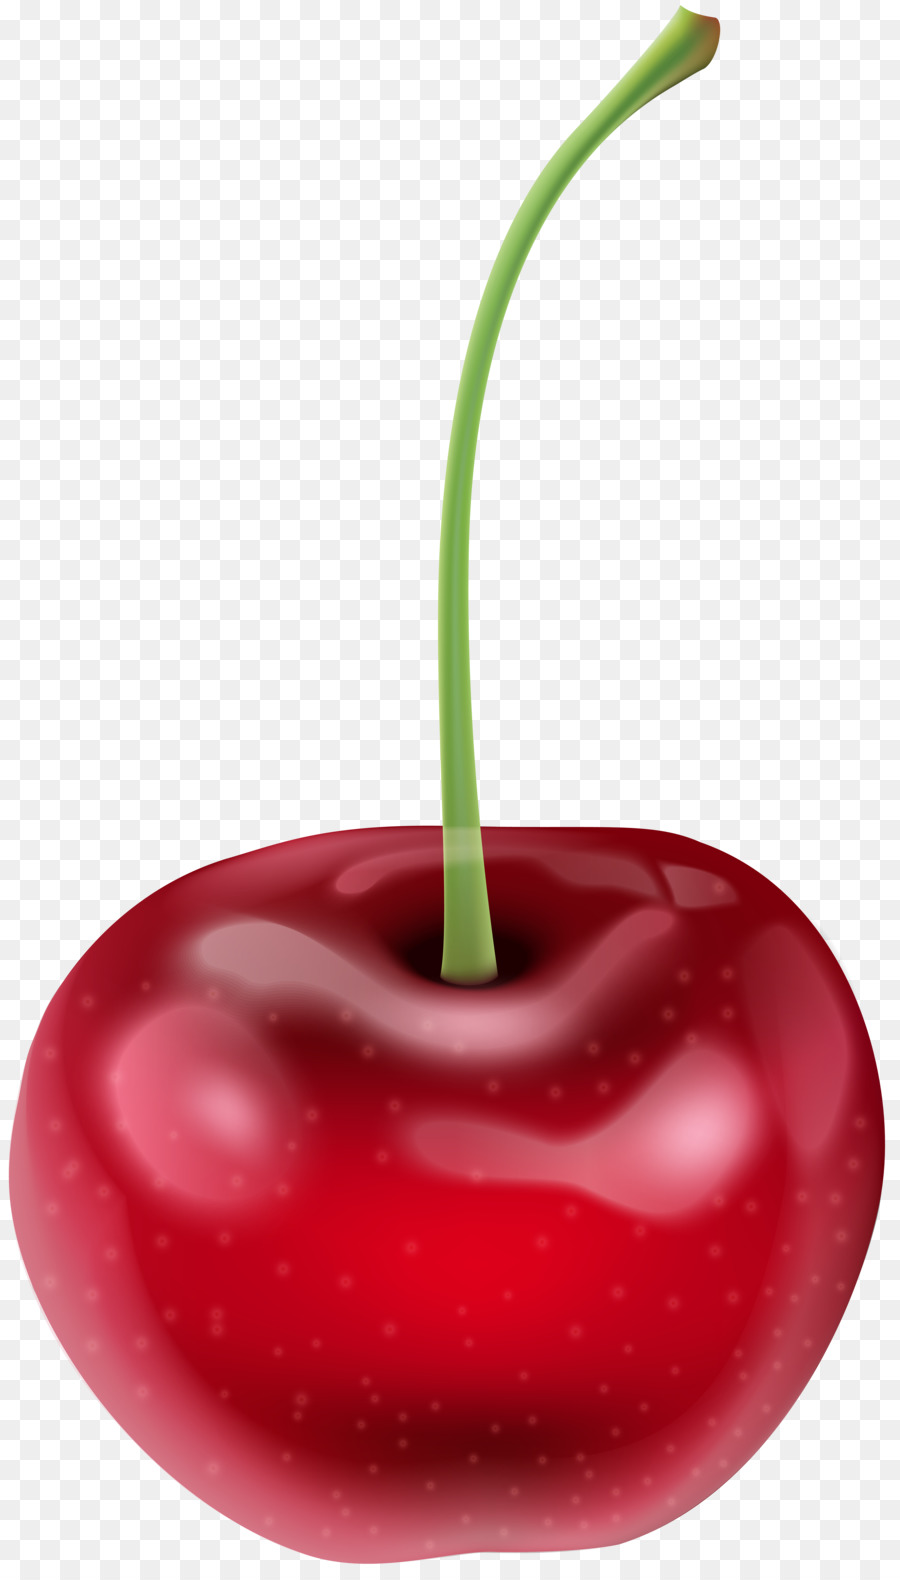 Cherry Clip art - cherry png download - 4592*8000 - Free Transparent Cherry png Download.